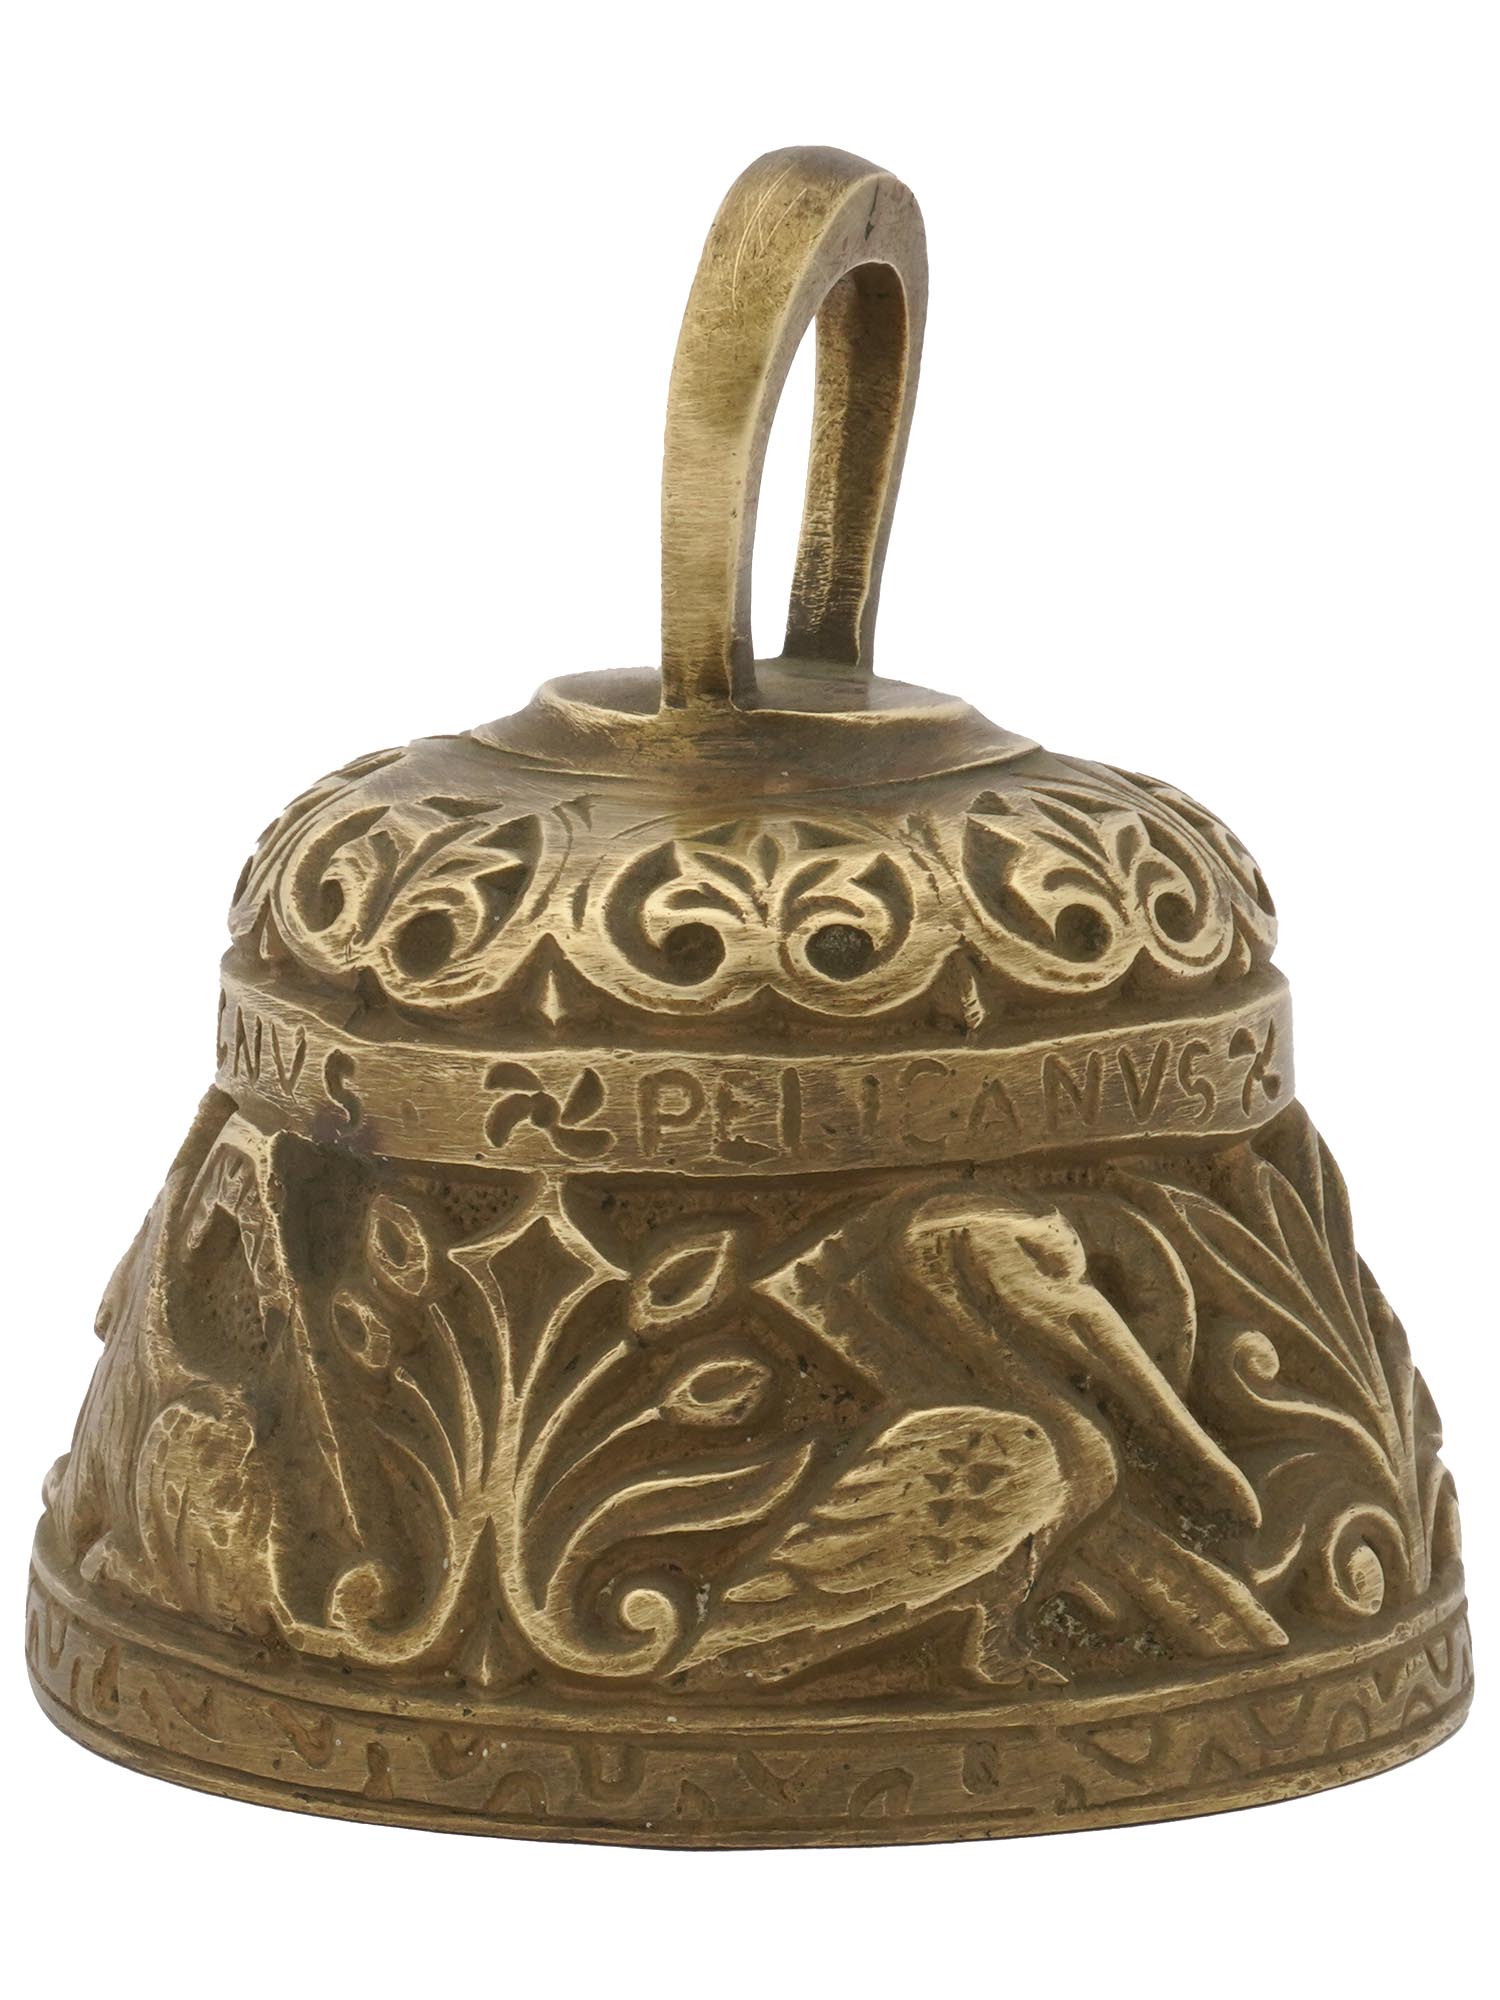 CAST BRONZE CHURCH HAND BELL WITH ANIMAL RELIEF PIC-1